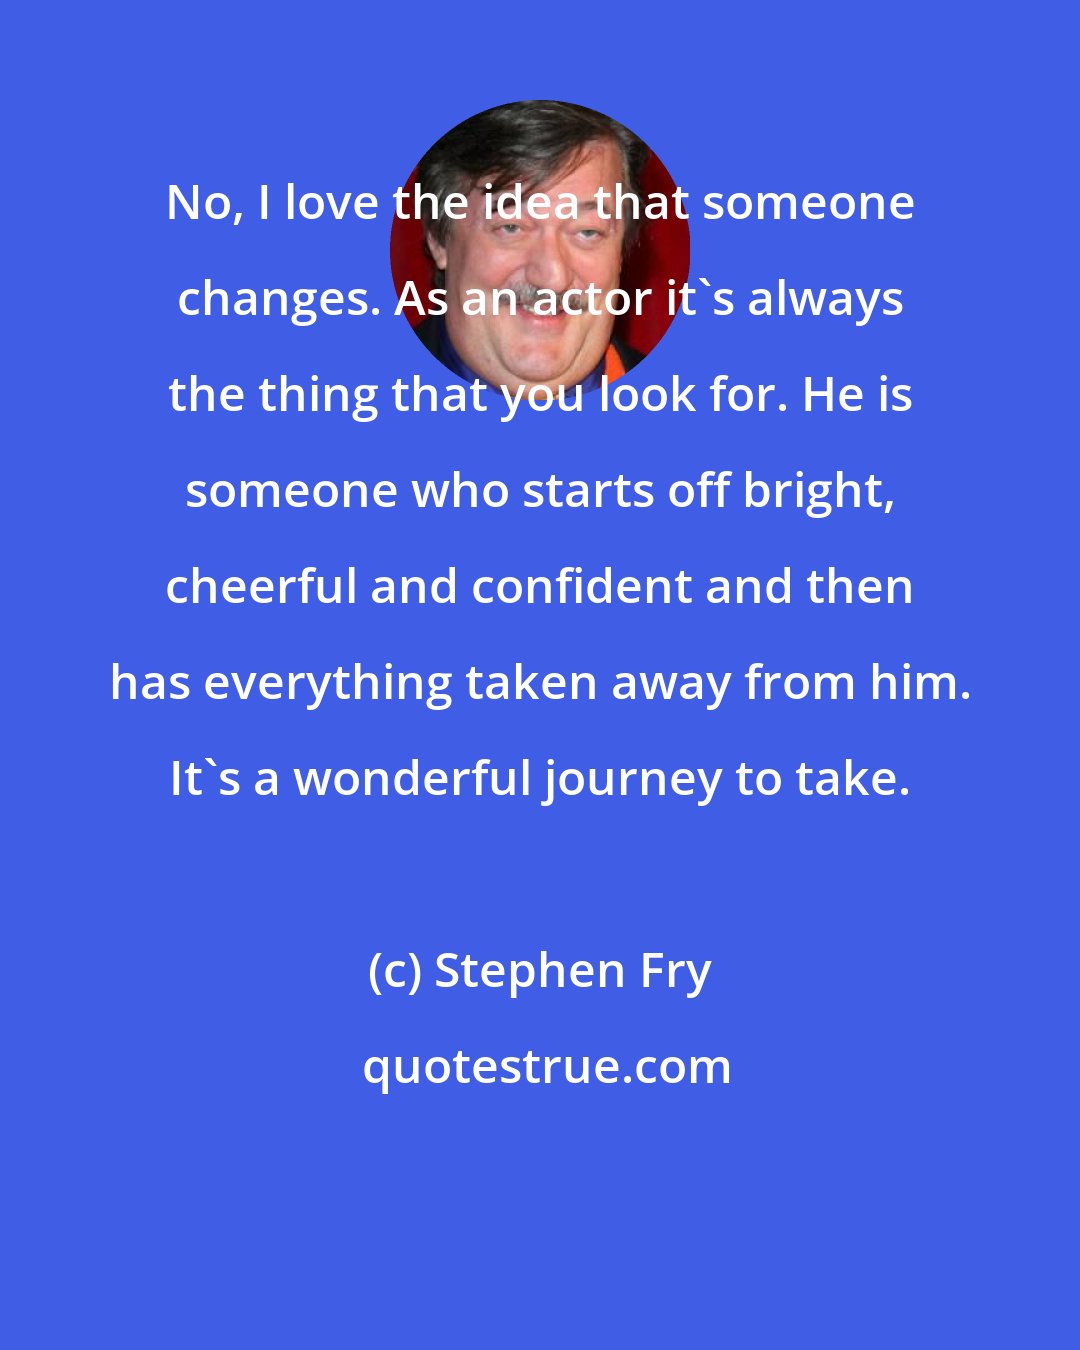 Stephen Fry: No, I love the idea that someone changes. As an actor it's always the thing that you look for. He is someone who starts off bright, cheerful and confident and then has everything taken away from him. It's a wonderful journey to take.